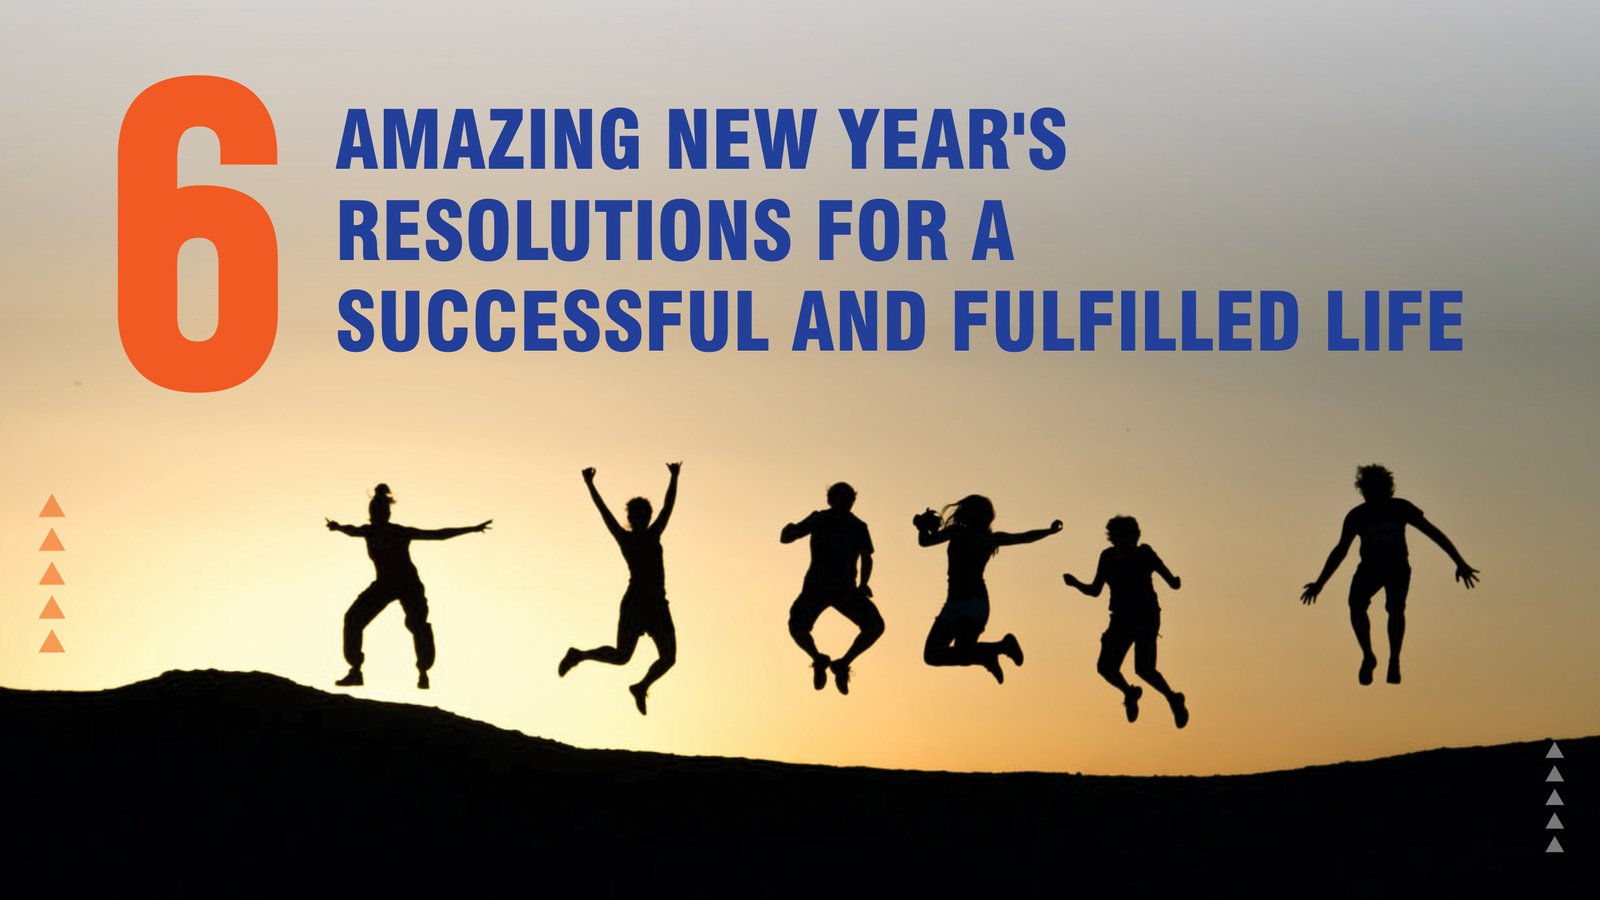 6 Amazing New Year’s Resolutions For A Successful And Fulfilled Life